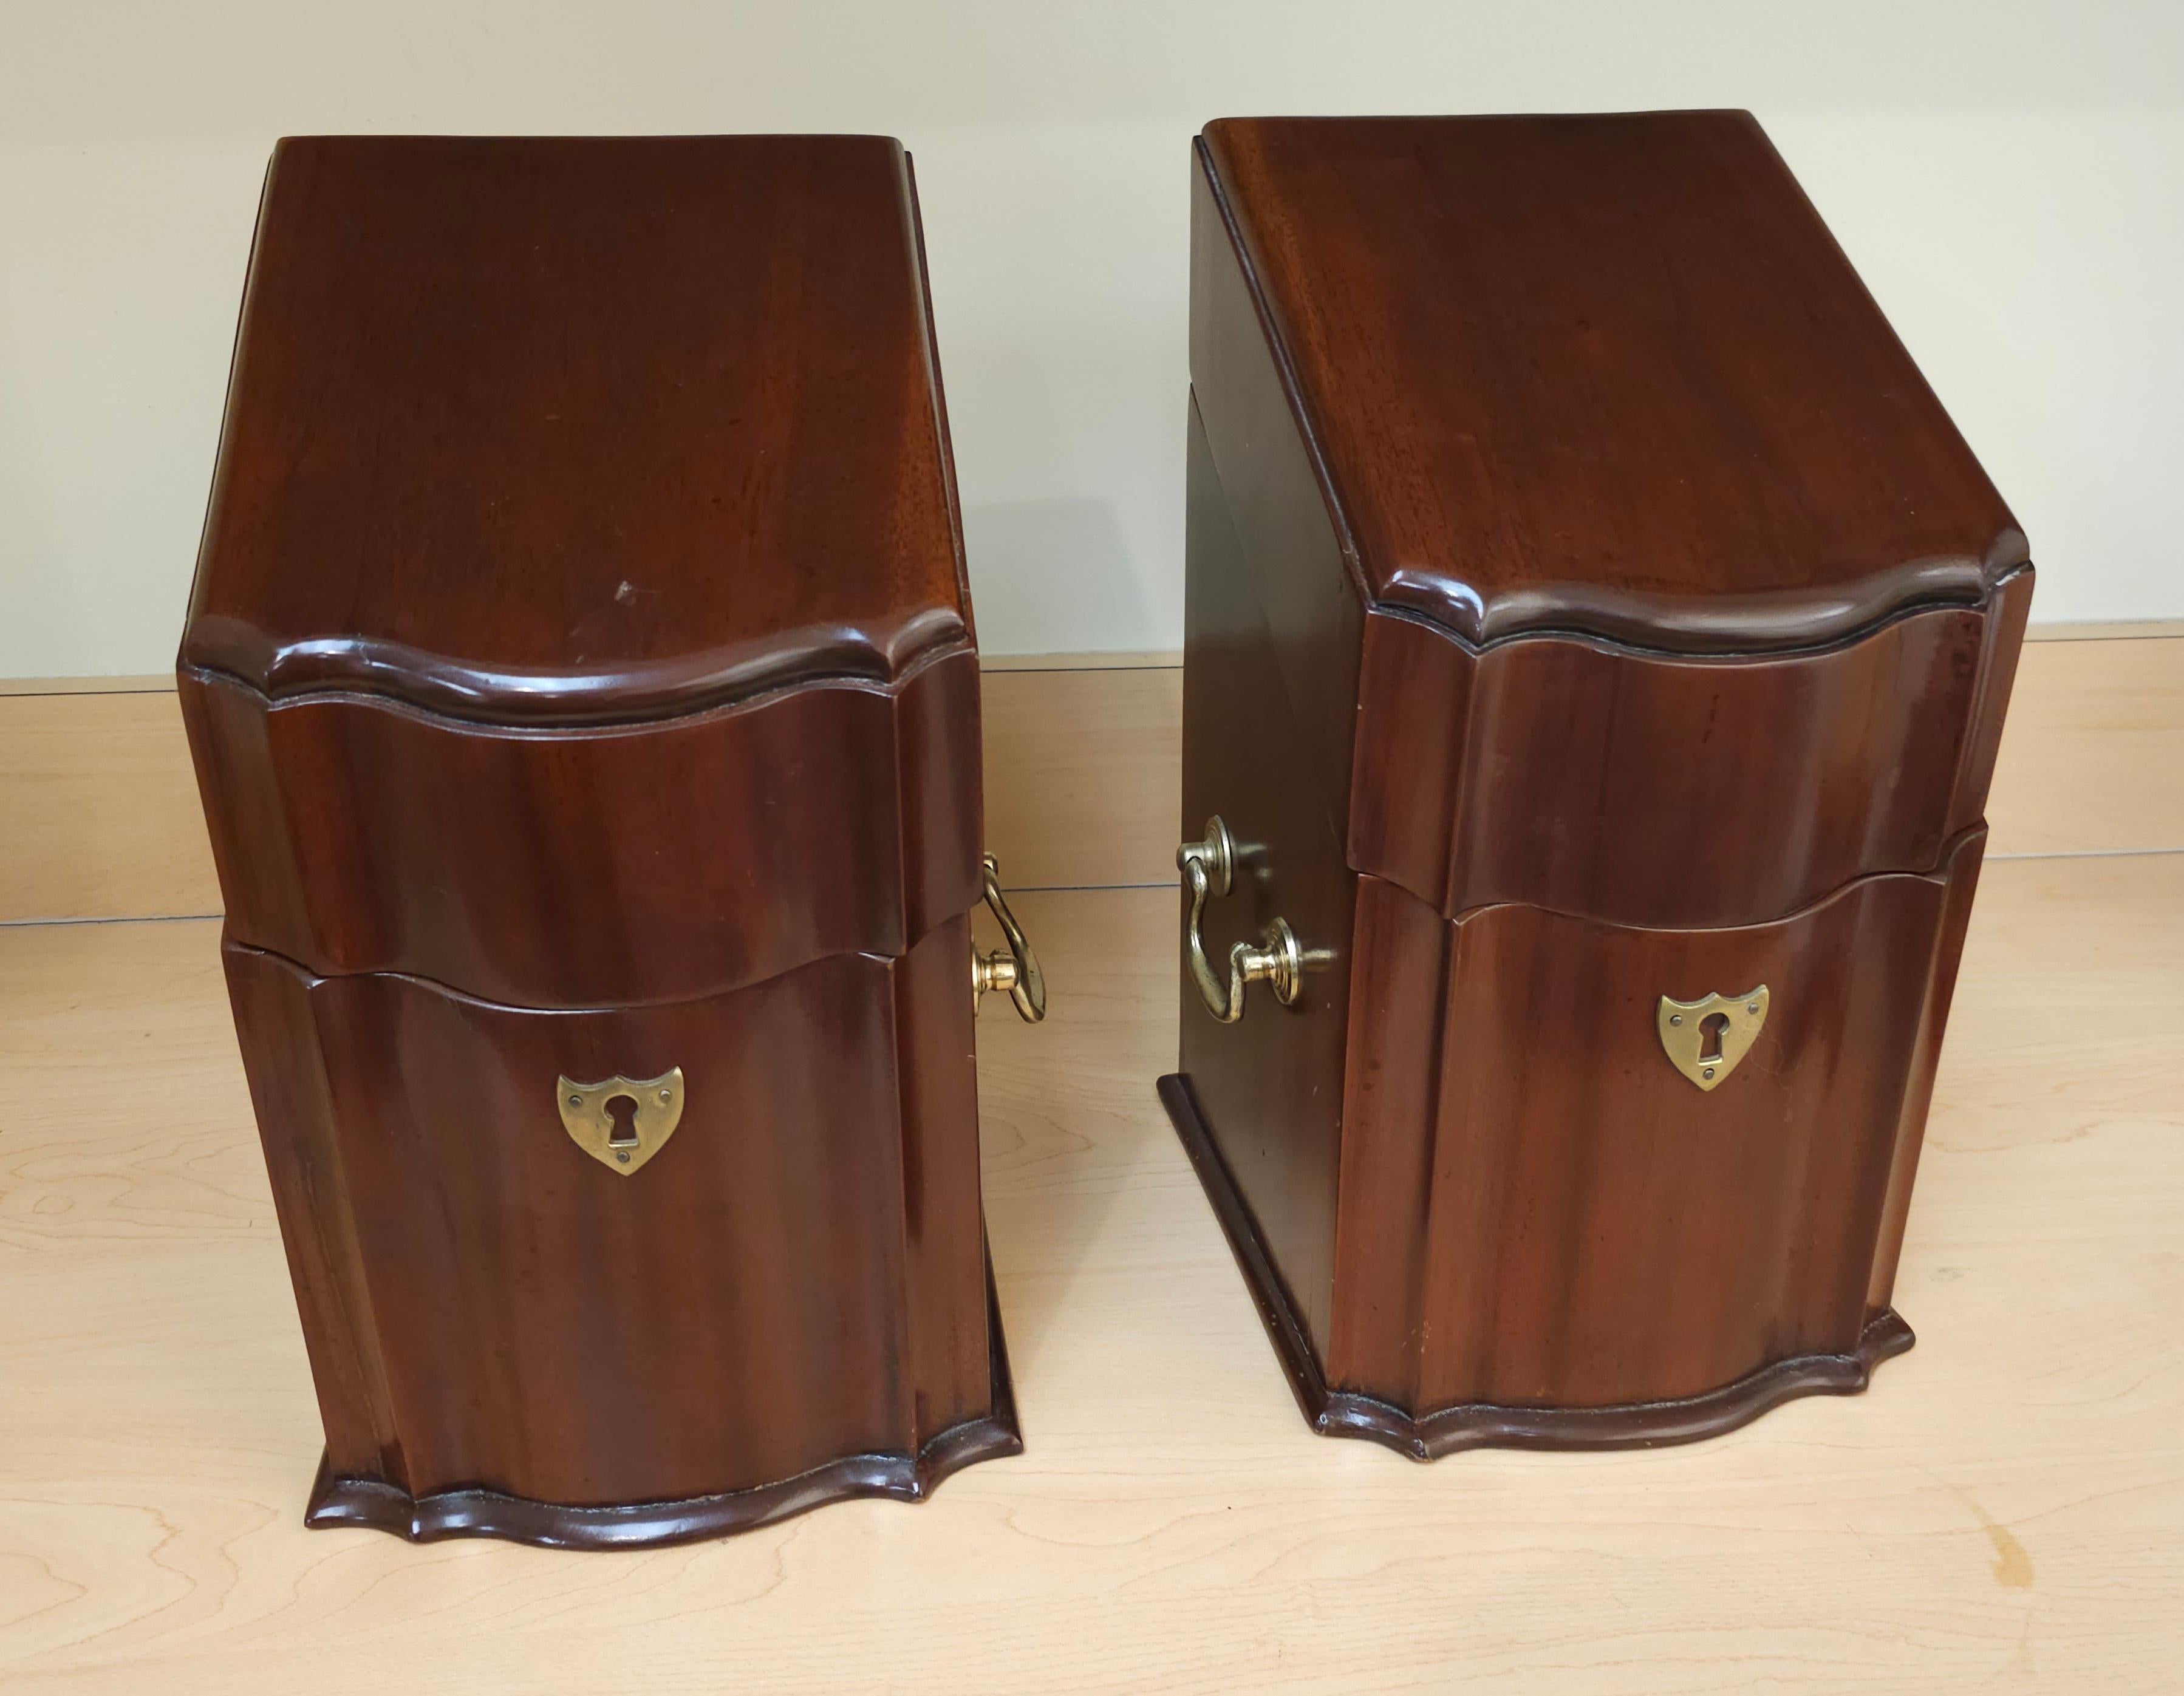 Gorgeous Pair Of Georgian Style Brass Mounted Mahogany Knife Boxes in great vintage condition. Interior is brown felt lined. Measure 7.5